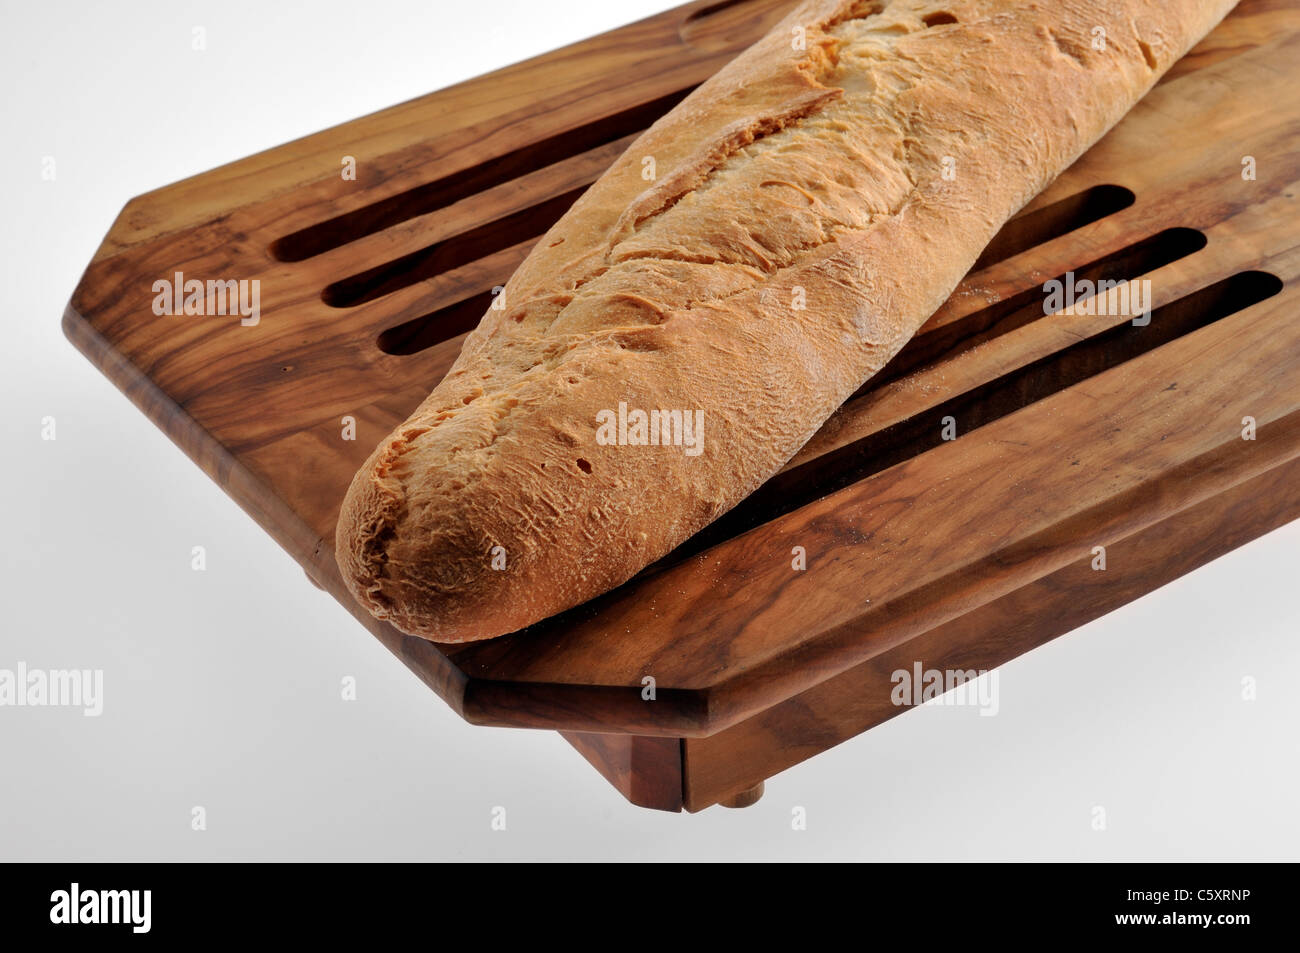 Bread loaf Stock Photo